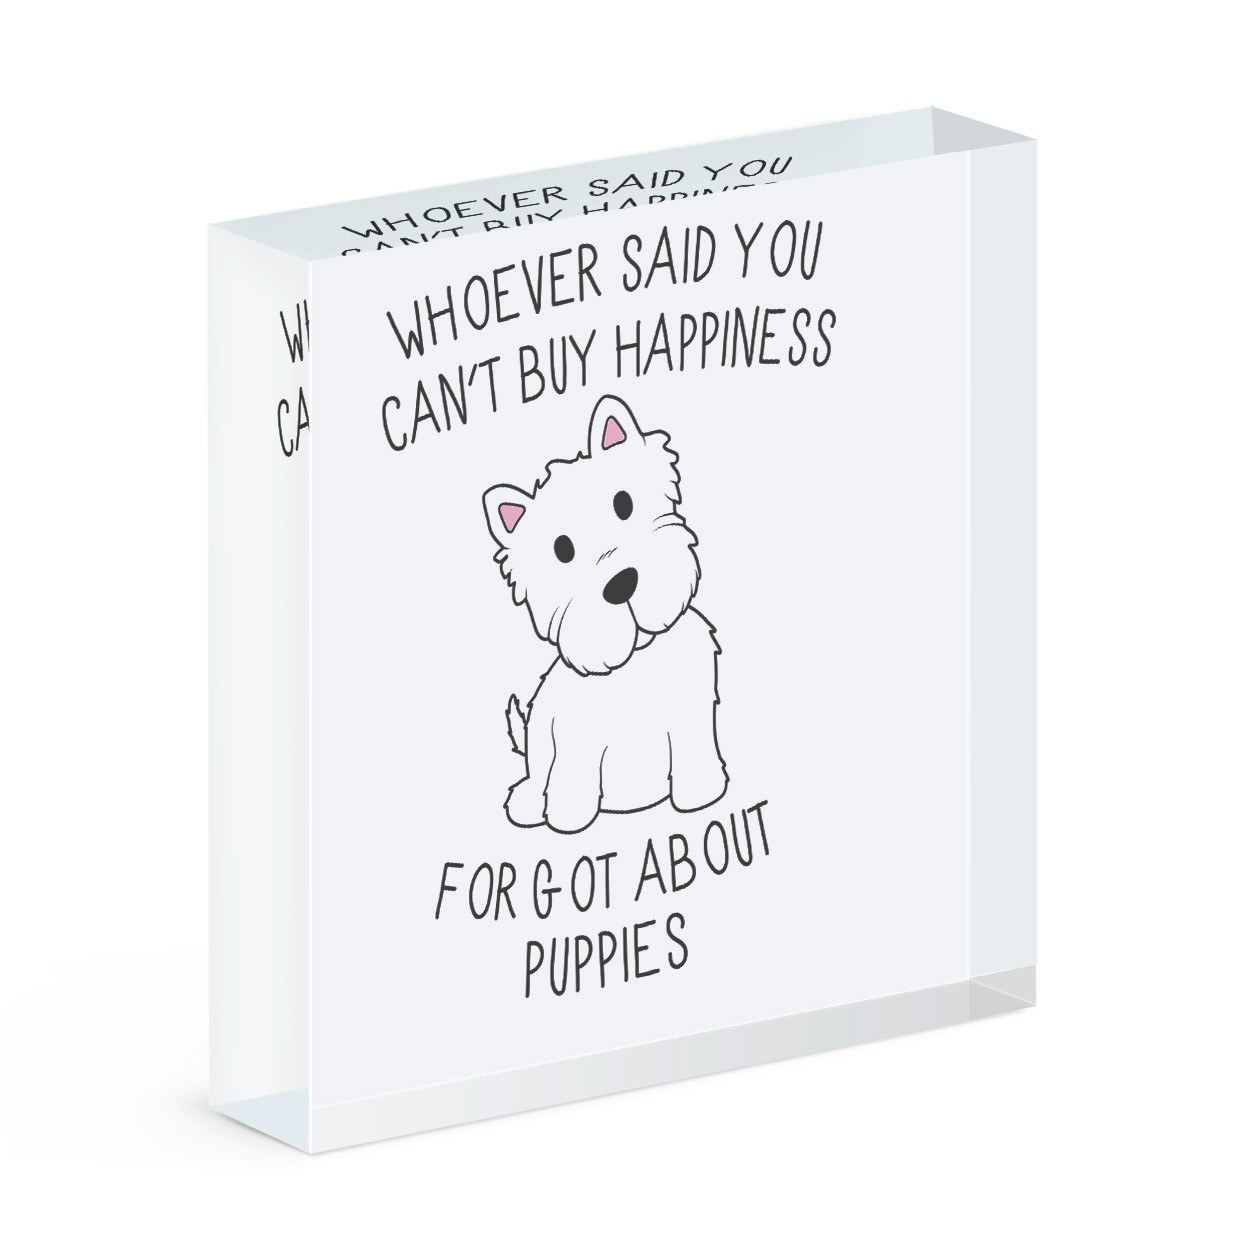 Whoever Said You Can't Buy Happiness Forgot About Puppies Acrylic Block